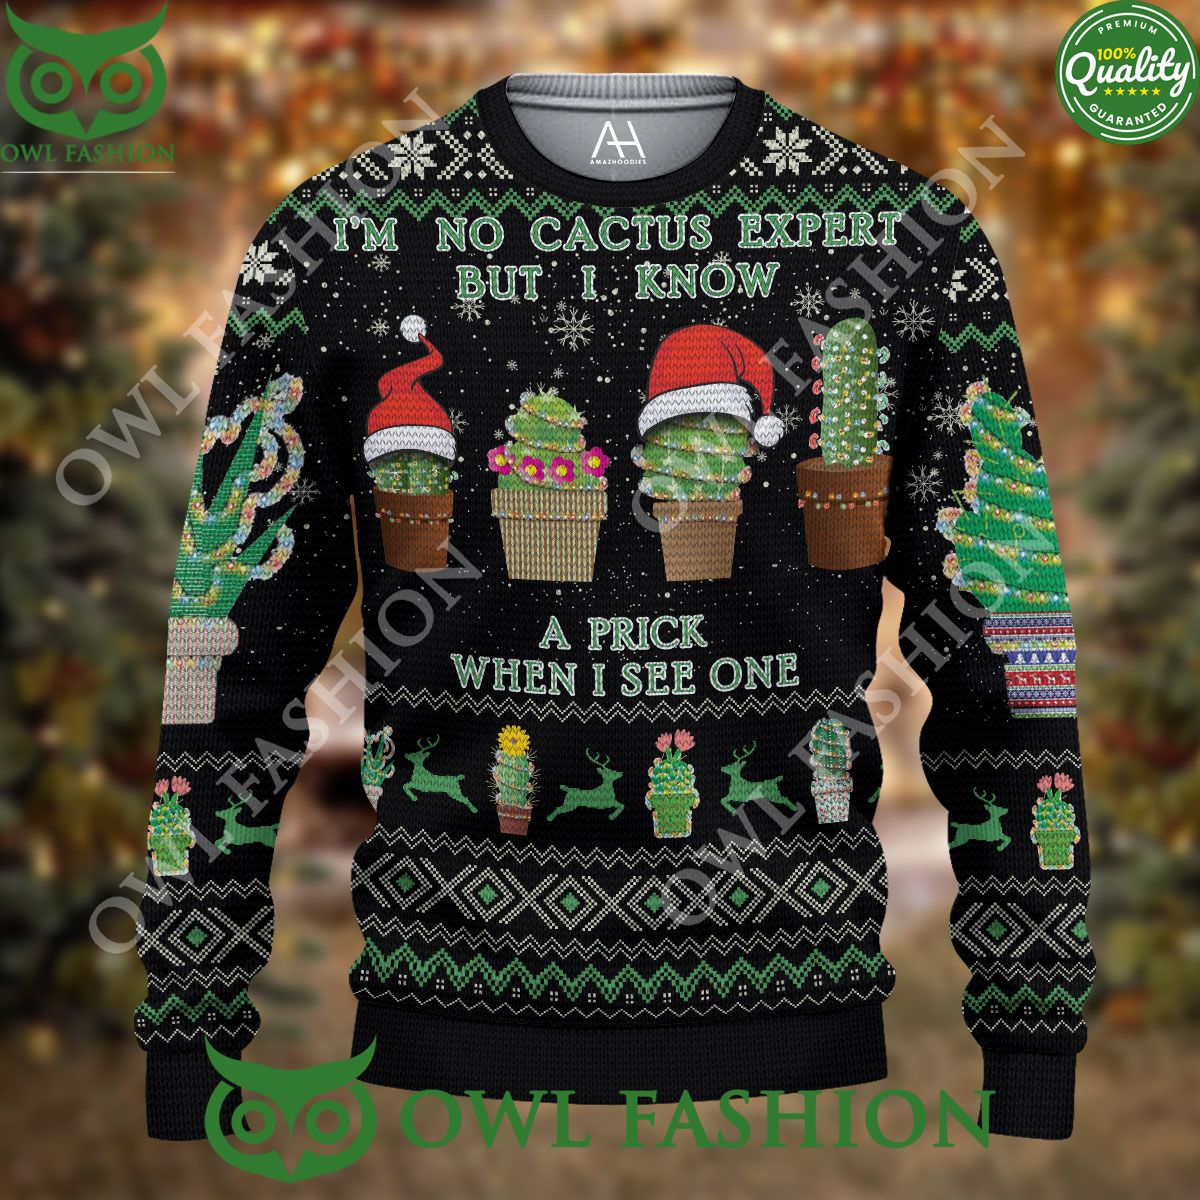 I'm No Cactus Expert But I Know A Prick When I See One 3D AOP Ugly Sweater Christmas